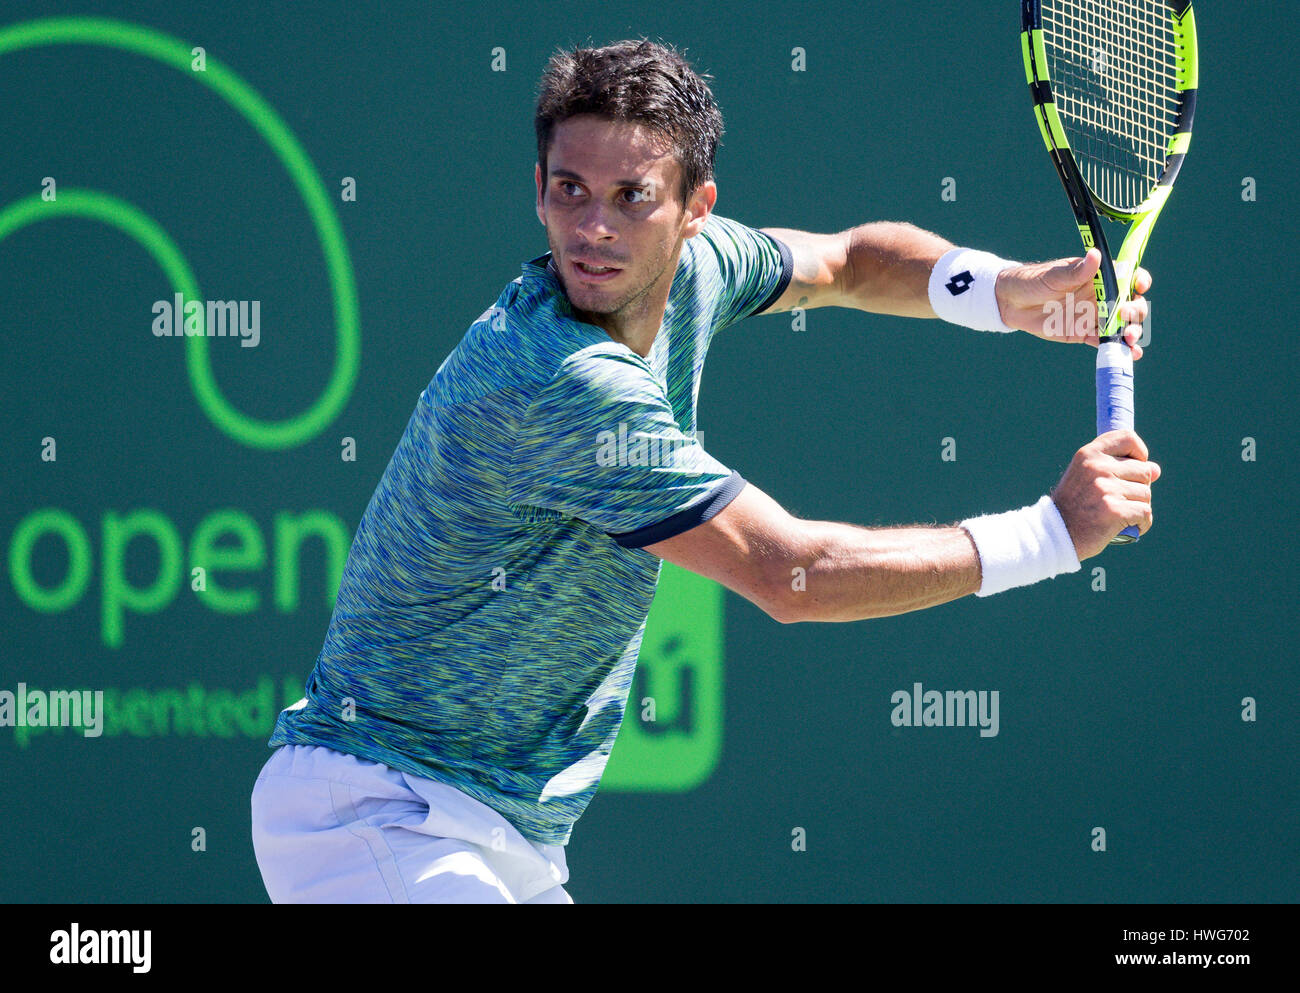 Key Biscayne, Florida, USA. 21st Mar, 2017. Rogerio Dutra Silva, from Brazil, plays a backhand against Christian Harrison, of the United States, at the 2017 Miami Open presented by Itau professional tennis tournament, played at Crandon Park Tennis Center in Key Biscayne, Florida, USA. Mario Houben/CSM/Alamy Live News Stock Photo